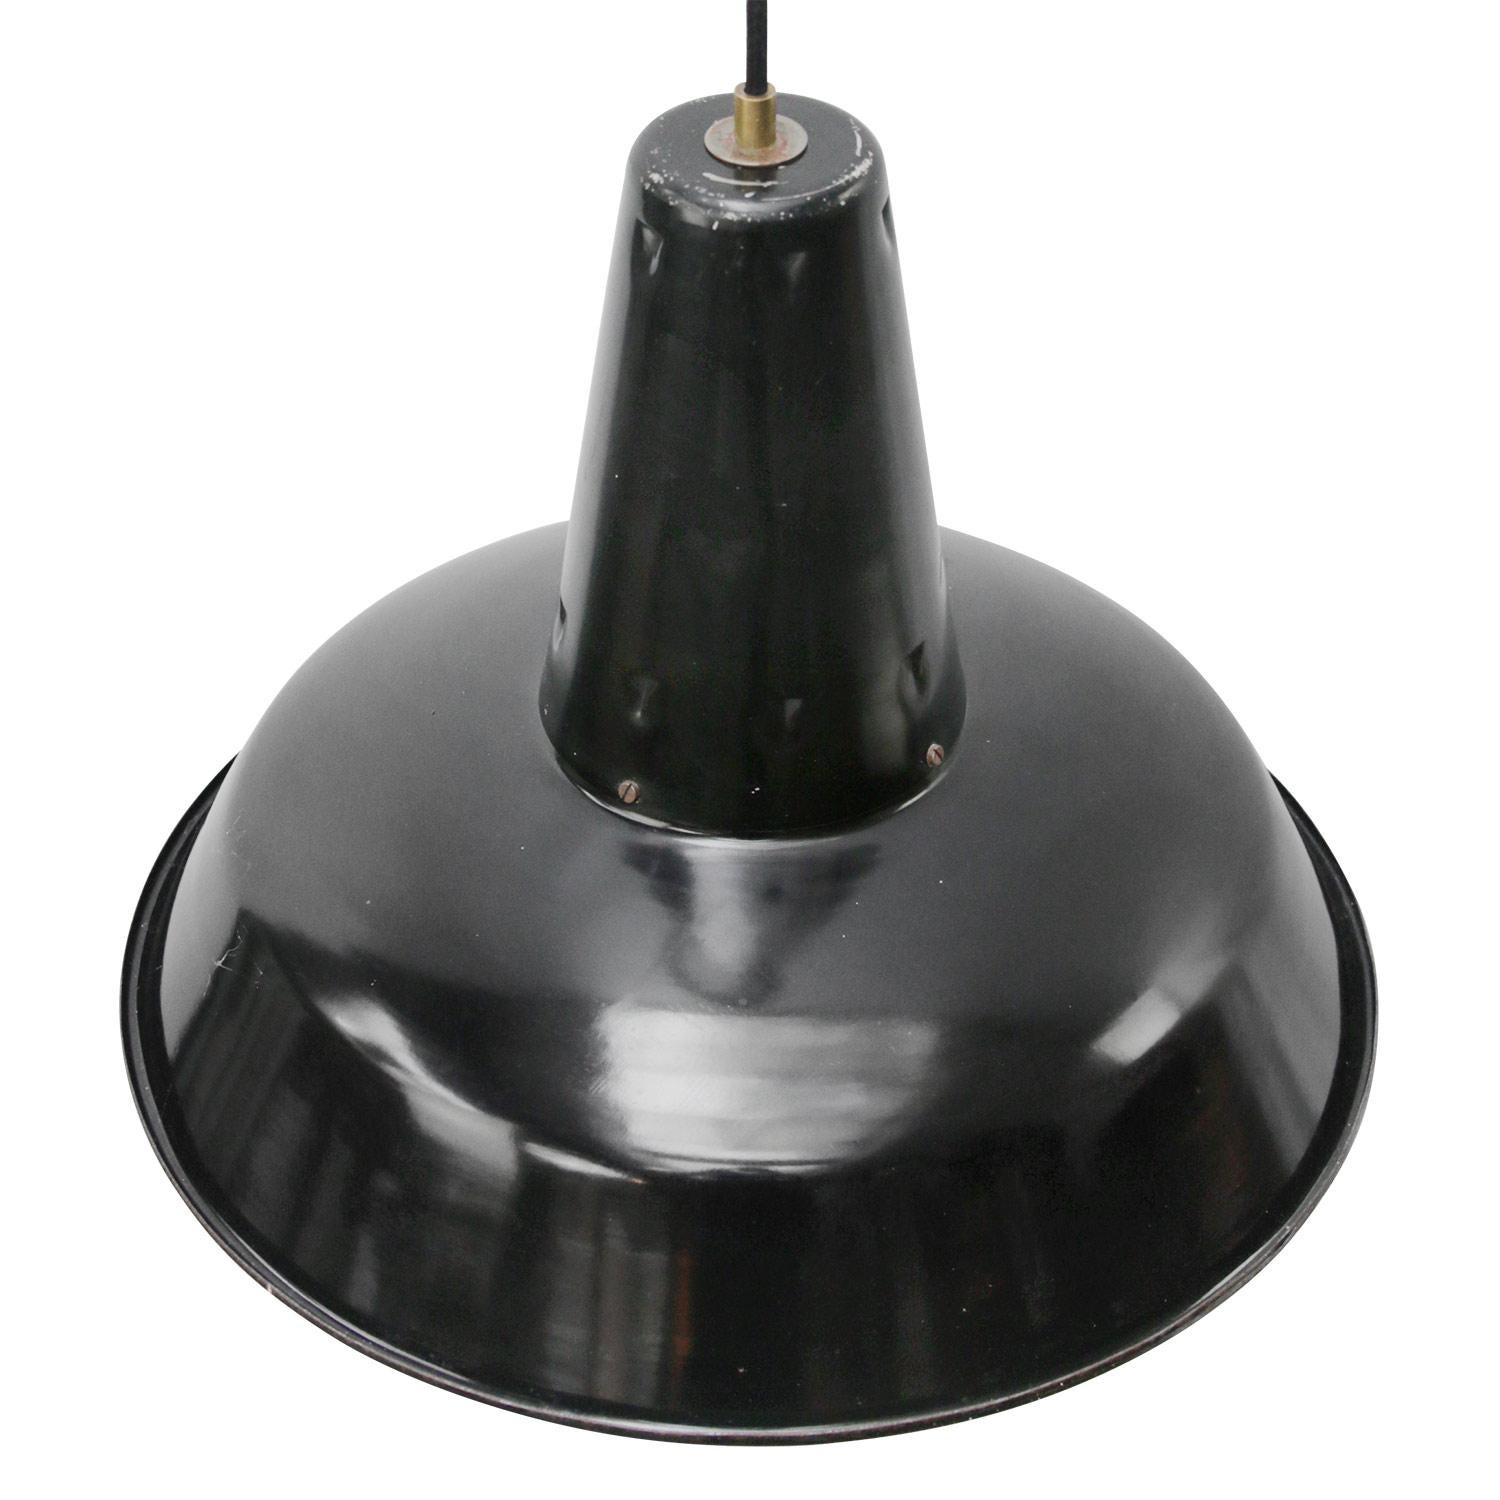 French factory light.
Black aluminium top with enamel shade.
White inside.

Weight: 1.50 kg / 3.3 lb

Priced per individual item. All lamps have been made suitable by international standards for incandescent light bulbs, energy-efficient and